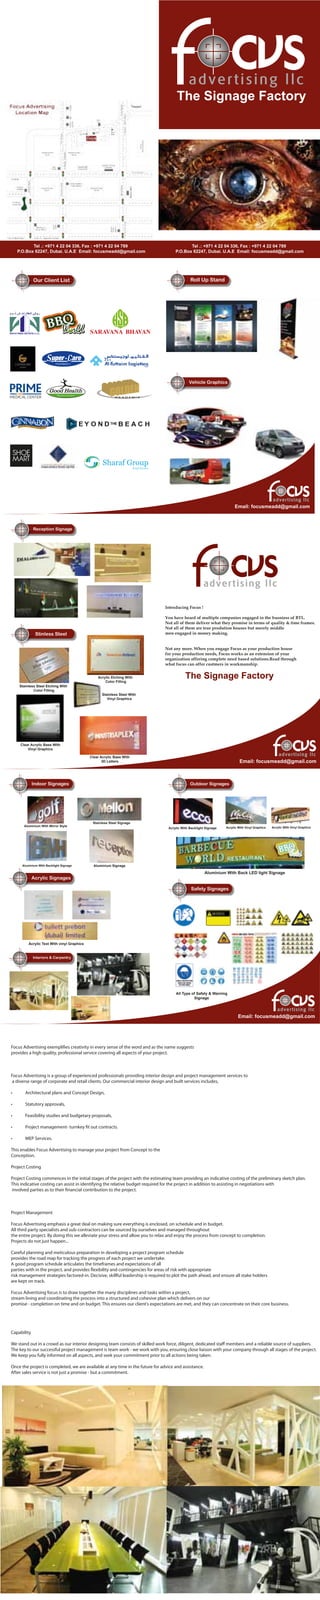 Our Client List Roll Up Stand
Vehicle Graphics
Email: focusmeadd@gmail.com
The Signage Factory
Tel .: +971 4 22 04 336, Fax : +971 4 22 04 789
P.O.Box 62247, Dubai. U.A.E Email: focusmeadd@gmail.com
Tel .: +971 4 22 04 336, Fax : +971 4 22 04 789
P.O.Box 62247, Dubai. U.A.E Email: focusmeadd@gmail.com
Reception Signage
Stinless Steel
Email: focusmeadd@gmail.com
Introducing Focus !
You have heard of multiple companies engaged in the busniess of BTL.
Not all of them deliver what they promise in terms of quality & time frames.
Not all of them are true prodution houses but merely middle
men engaged in money making.
Not any more. When you engage Focus as your production house
for your production needs, Focus works as an extension of your
organization offering complete need based solutions.Read through
what focus can offer custmers in workmanship.
The Signage Factory
Stainless Steel Etching With
Color Filling
Stainless Steel With
Vinyl Graphics
Clear Acrylic Base With
Vinyl Graphics
Clear Acrylic Base With
3D Letters
Acrylic Etching With
Color Filling
Acrylic Text With vinyl Graphics
Aluminium With Mirror Style
Outdoor SignagesIndoor Signages
Safety Signages
Acrylic Signages
Interiors & Carpentry
Email: focusmeadd@gmail.com
Stainless Steel Signage
Aluminium With Backlight Signage Aluminium Signage
Acrylic With Backlight Signage Acrylic With Vinyl Graphics Acrylic With Vinyl Graphics
Aluminium With Back LED light Signage
All Type of Safety & Warning
Signage
Focus Advertising exemplifies creativity in every sense of the word and as the name suggests
provides a high quality, professional service covering all aspects of your project.
Focus Advertising is a group of experienced professionals providing interior design and project management services to
a diverse range of corporate and retail clients. Our commercial interior design and built services includes,
• Architectural plans and Concept Design,
• Statutory approvals,
• Feasibility studies and budgetary proposals,
• Project management- turnkey fit out contracts.
• MEP Services.
This enables Focus Advertising to manage your project from Concept to the
Conception.
Project Costing
Project Costing commences in the initial stages of the project with the estimating team providing an indicative costing of the preliminary sketch plan.
This indicative costing can assist in identifying the relative budget required for the project in addition to assisting in negotiations with
involved parties as to their financial contribution to the project.
Project Management
Focus Advertising emphasis a great deal on making sure everything is enclosed, on schedule and in budget.
All third party specialists and sub-contractors can be sourced by ourselves and managed throughout
the entire project. By doing this we alleviate your stress and allow you to relax and enjoy the process from concept to completion.
Projects do not just happen...
Careful planning and meticulous preparation in developing a project program schedule
provides the road map for tracking the progress of each project we undertake.
A good program schedule articulates the timeframes and expectations of all
parties with in the project, and provides flexibility and contingencies for areas of risk with appropriate
risk management strategies factored-in. Decisive, skillful leadership is required to plot the path ahead, and ensure all stake holders
are kept on track.
Focus Advertising focus is to draw together the many disciplines and tasks within a project,
stream lining and coordinating the process into a structured and cohesive plan which delivers on our
promise - completion on time and on budget. This ensures our client's expectations are met, and they can concentrate on their core business.
Capability
We stand out in a crowd as our interior designing team consists of skilled work force, diligent, dedicated staﬀ members and a reliable source of suppliers.
The key to our successful project management is team work - we work with you, ensuring close liaison with your company through all stages of the project.
We keep you fully informed on all aspects, and seek your commitment prior to all actions being taken.
Once the project is completed, we are available at any time in the future for advice and assistance.
After sales service is not just a promise - but a commitment.
 